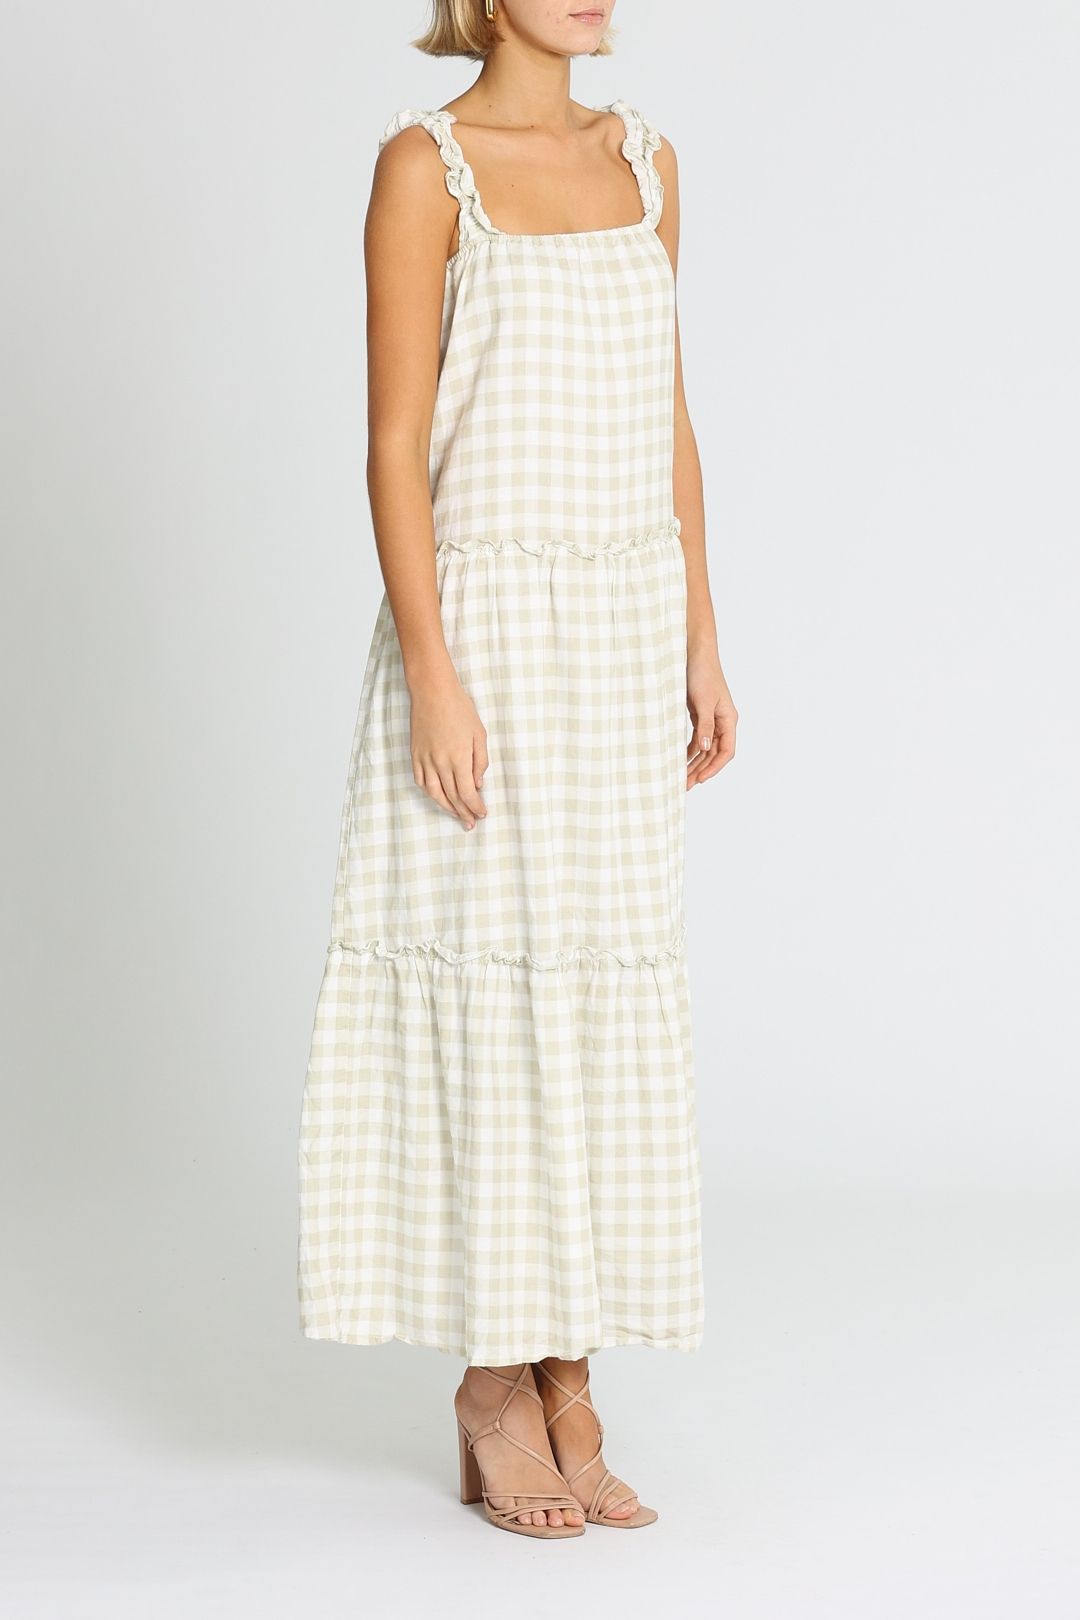 Charlie Holiday Lottie Gingham Maxi Dress A Line